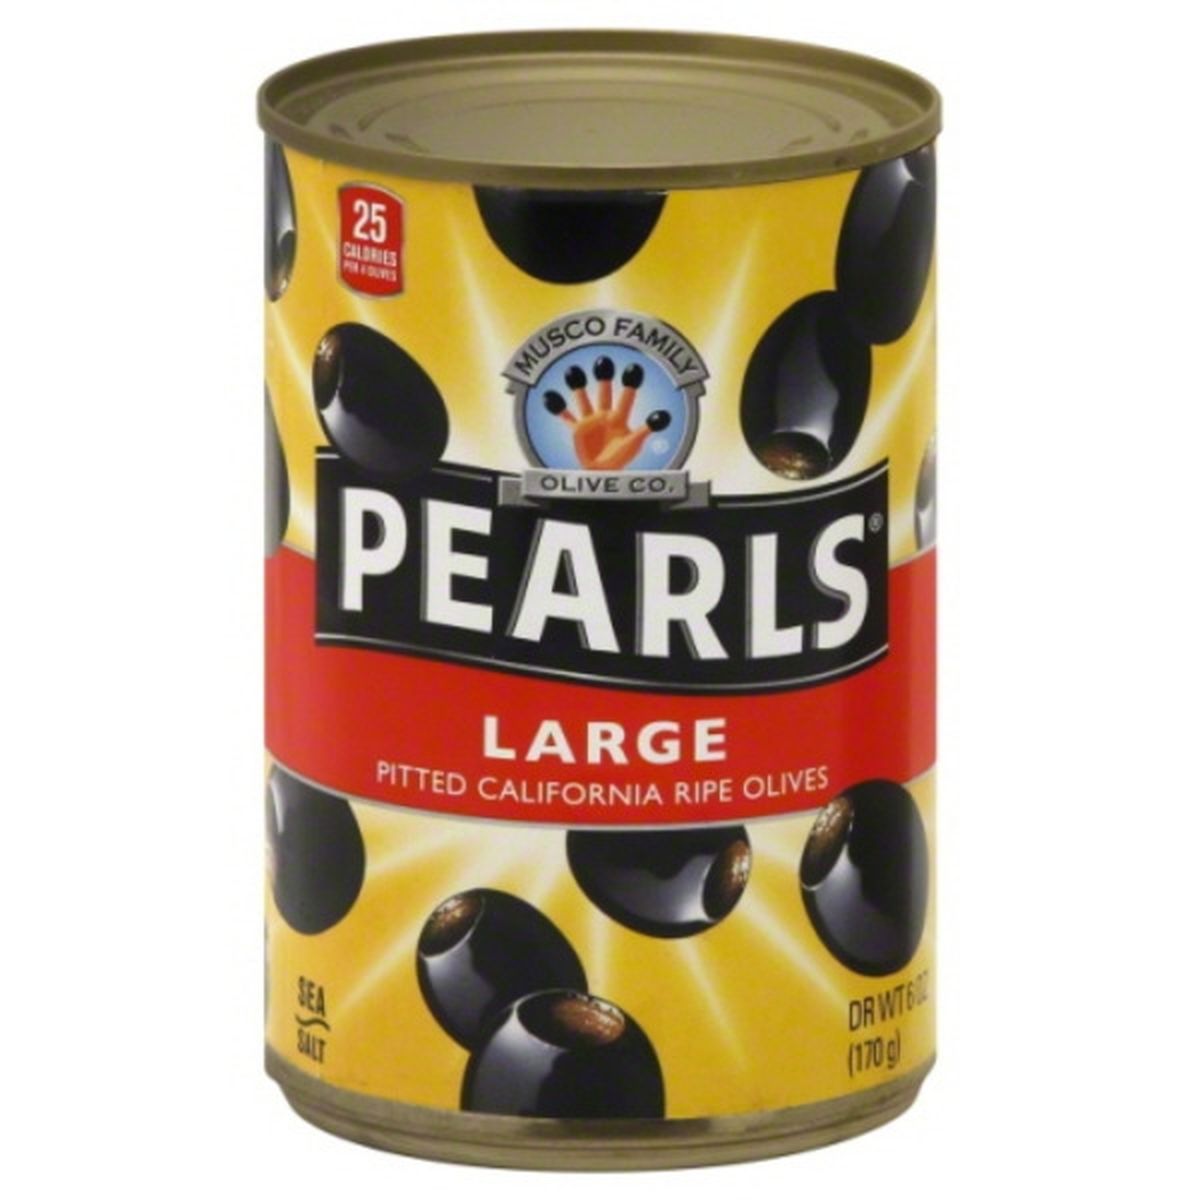 Calories in Pearls Pearls Olives, Pitted California Ripe, Large